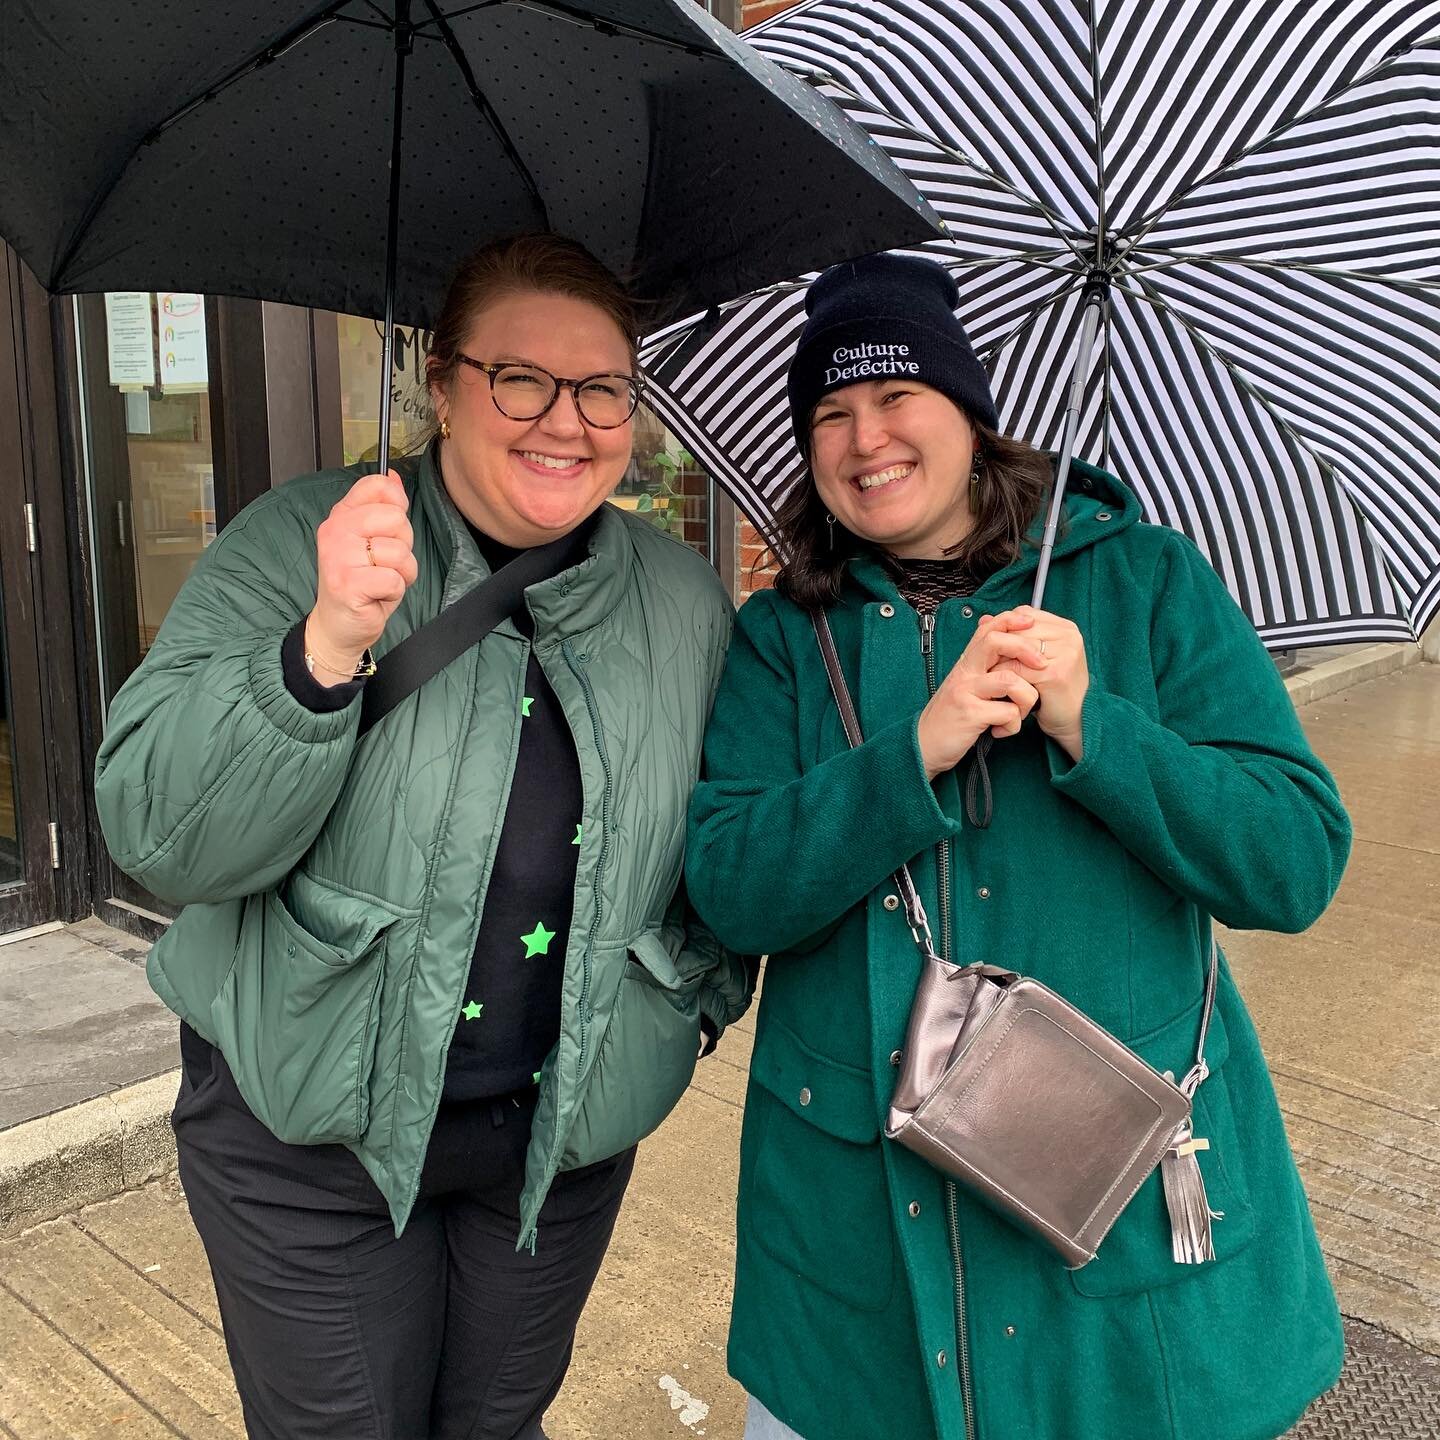 What to do on a rainy March Weekend in Ottawa: Part 1

Last weekend, I had the joy of a visit from my dear friend @missamberdawn from Winnipeg. As I was thinking up things she might like to do, luck would have it there was a @613flea happening at Lan